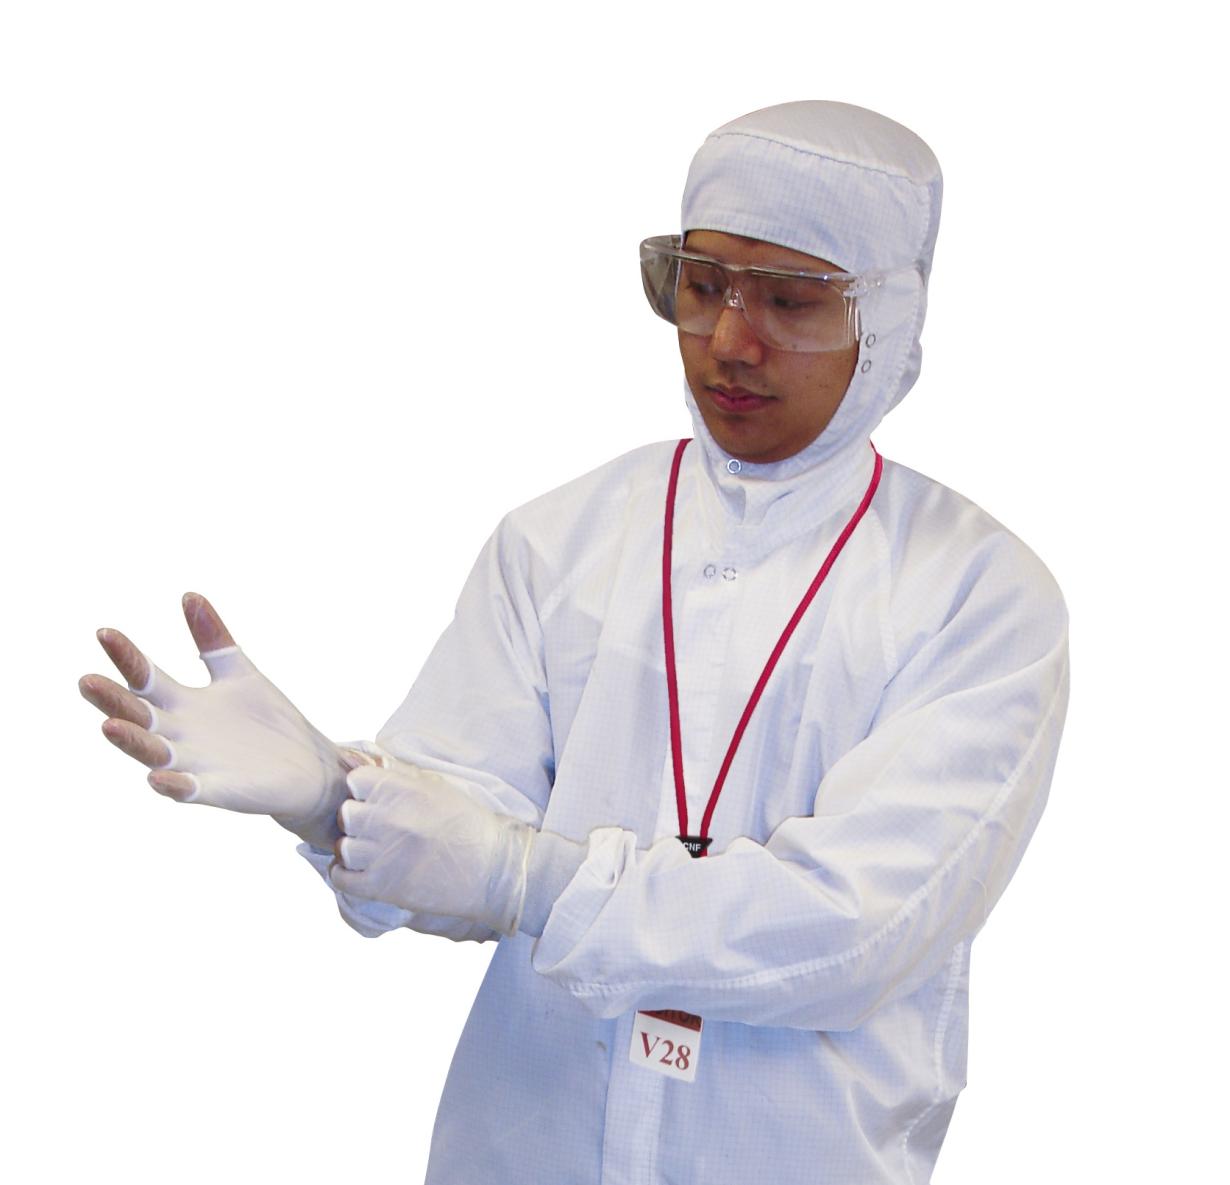 Person in full personal protective equipment puts on a white cleanroom suit